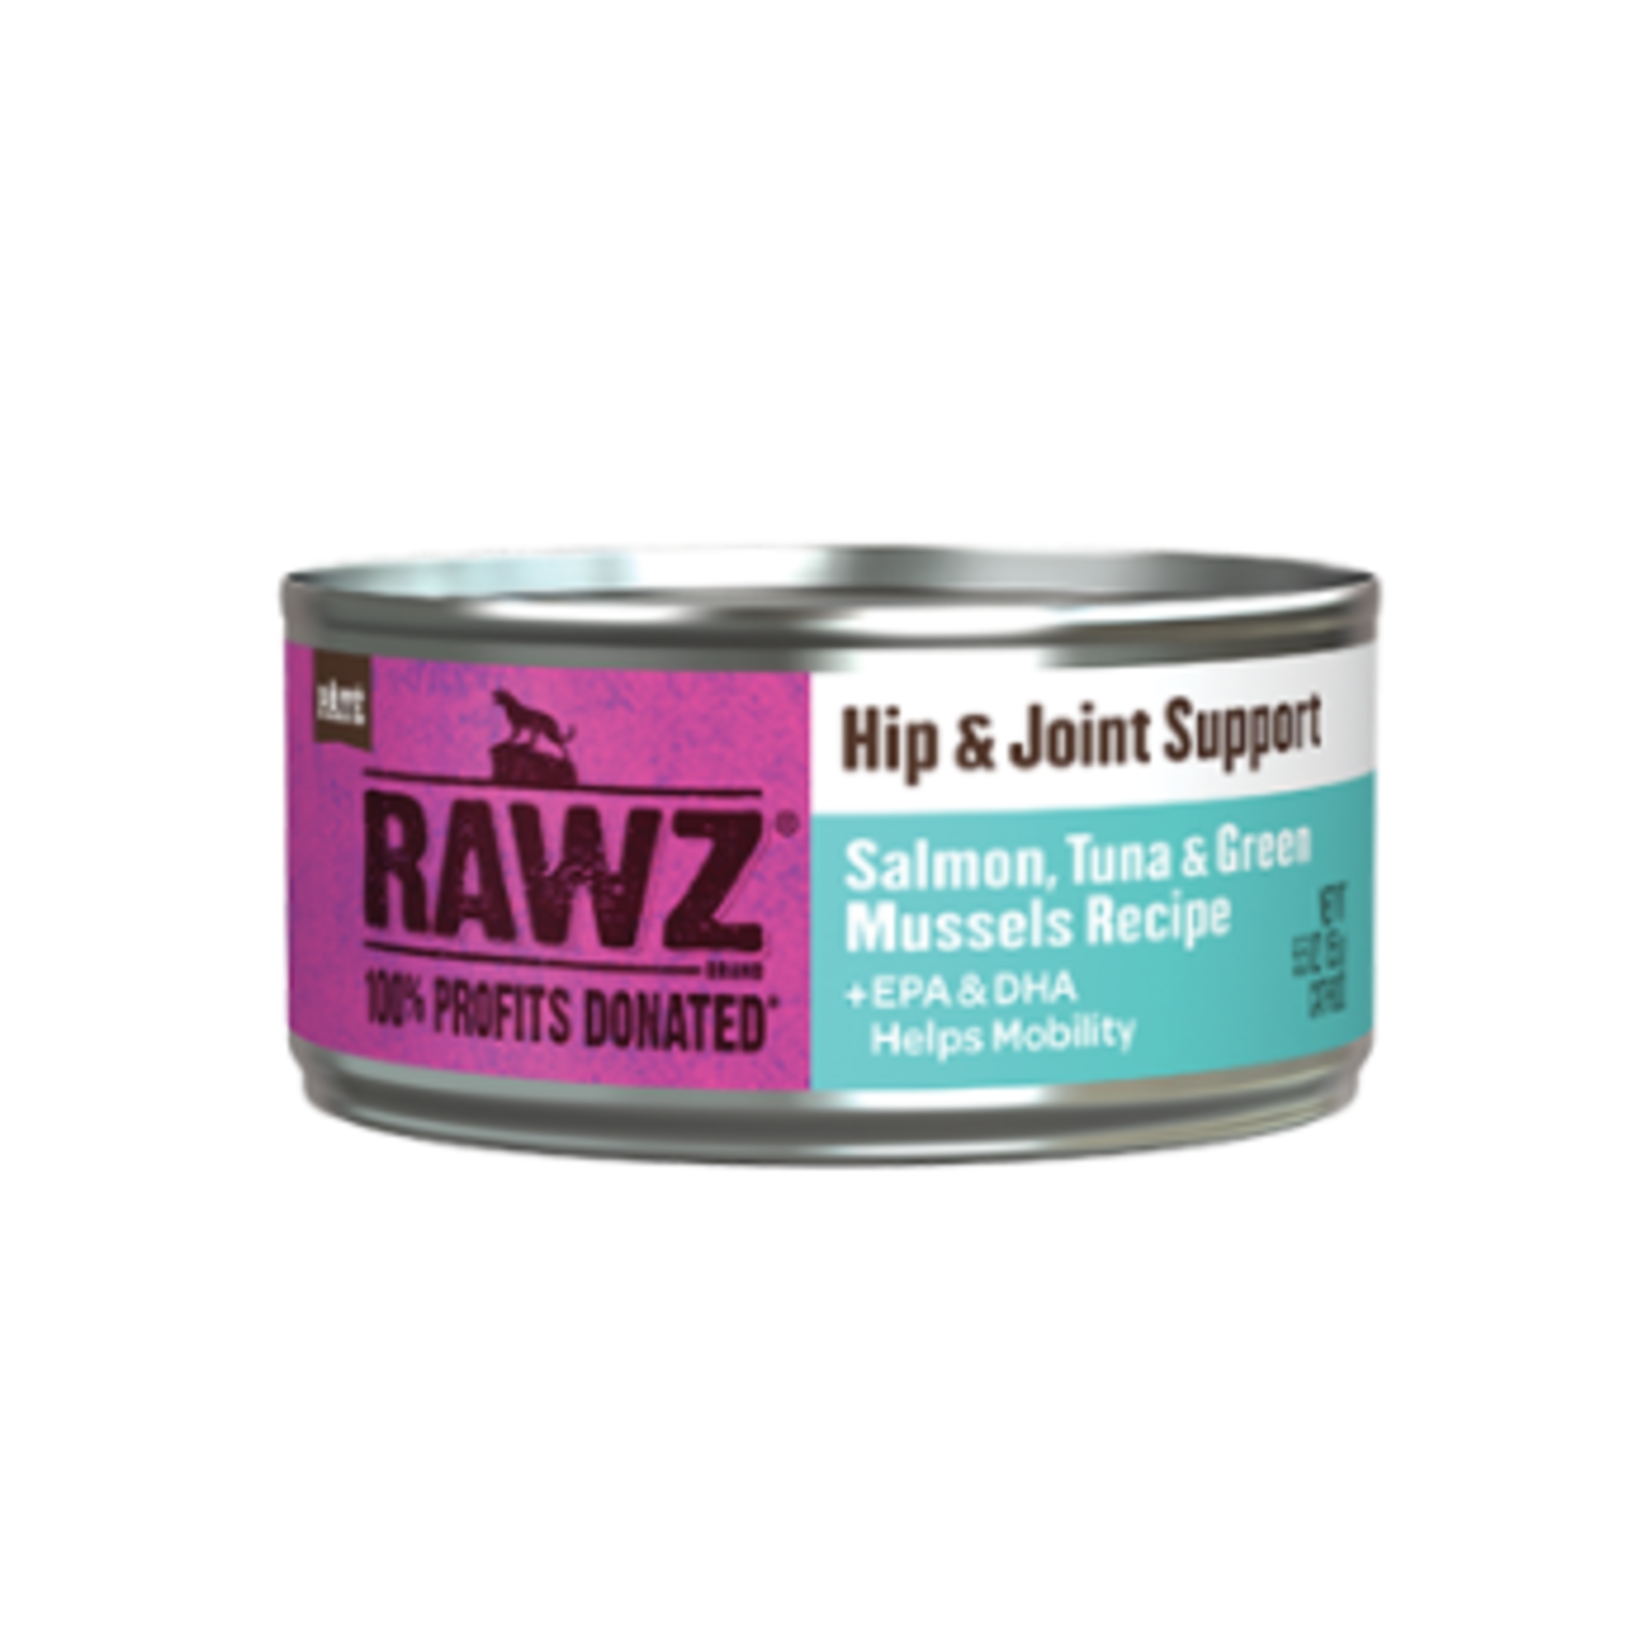 RAWZ Hip & Joint Support - Salmon & Green Mussels - 5.5 oz